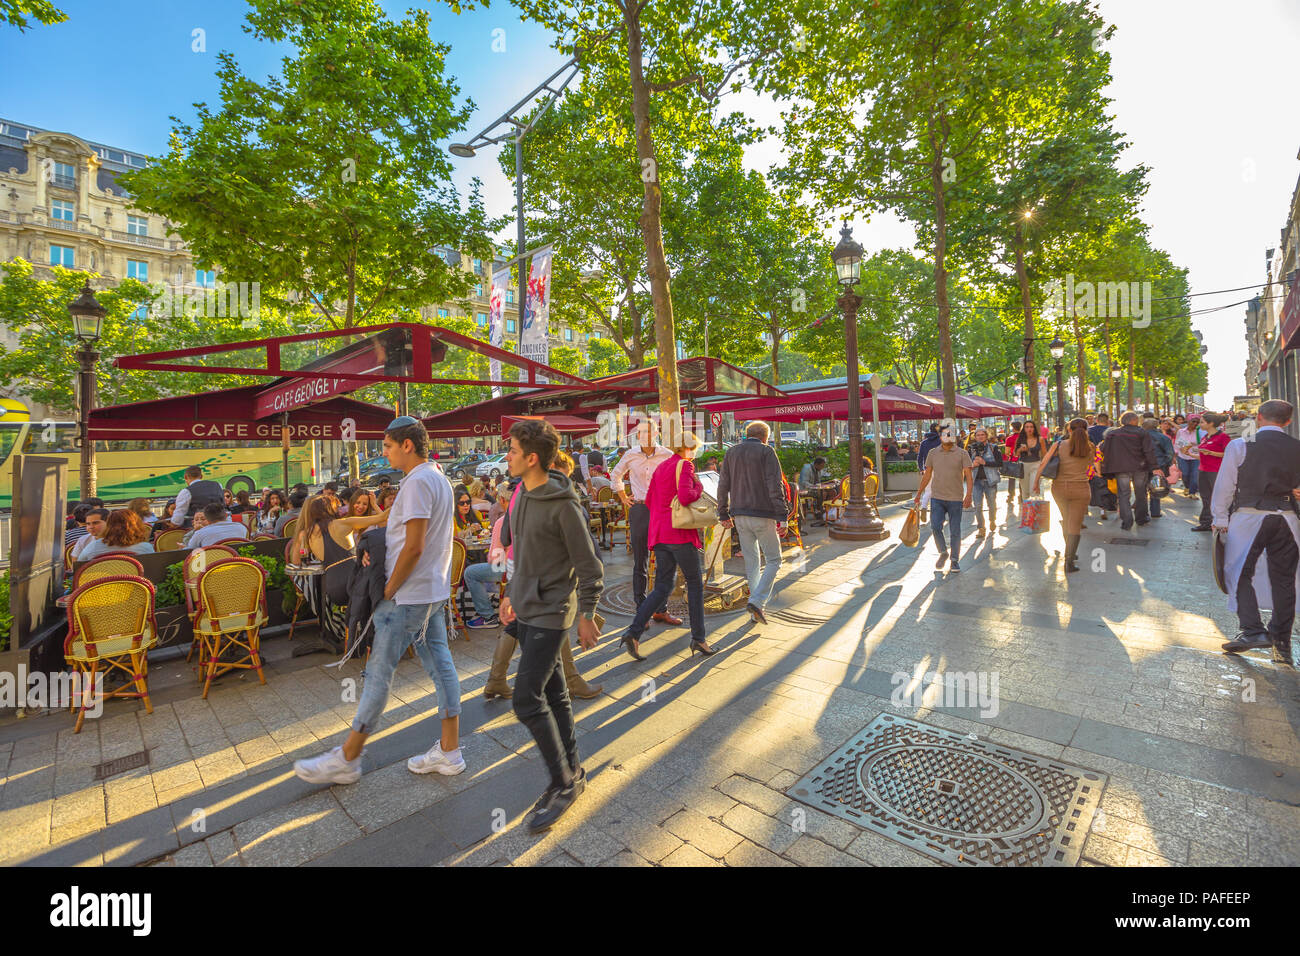 Paris, France - July 2, 2017: tourists walk on the most famous avenue of Paris, the Champs Elysees, for shopping in luxury shops. Lifestyle people sitting at Cafe George V. Stock Photo